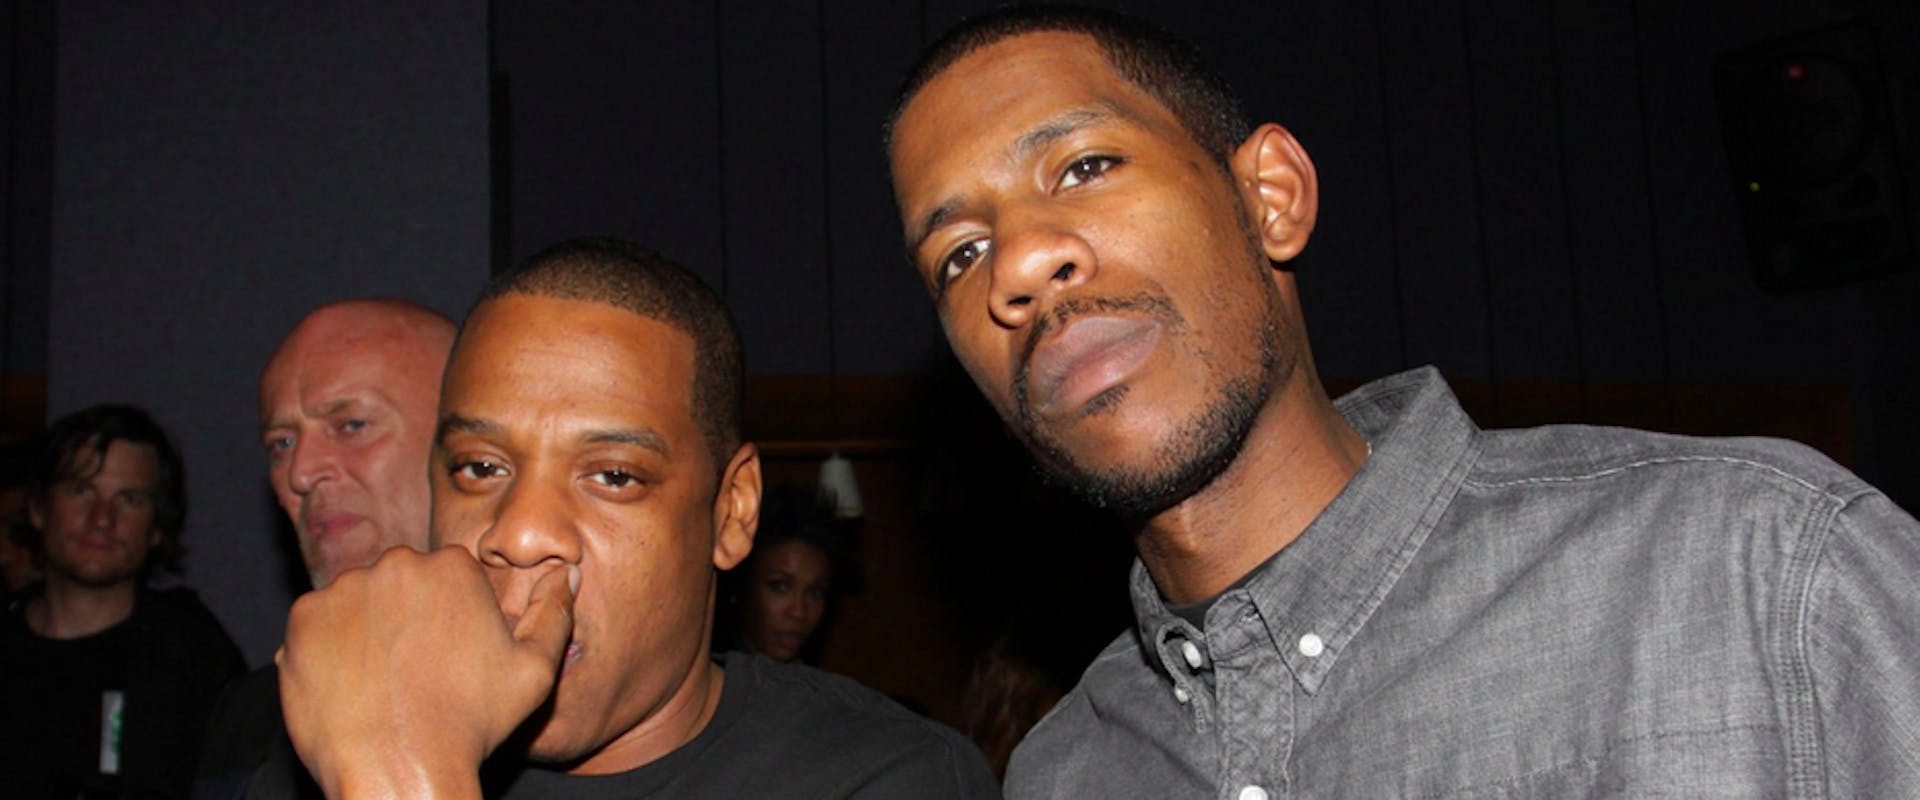 (L-R) Jay-Z and Young Guru attend Jay-Z's Official Madison Square Garden Concert After Party at the 40 / 40 Club on March 2, 2010 in New York City. 